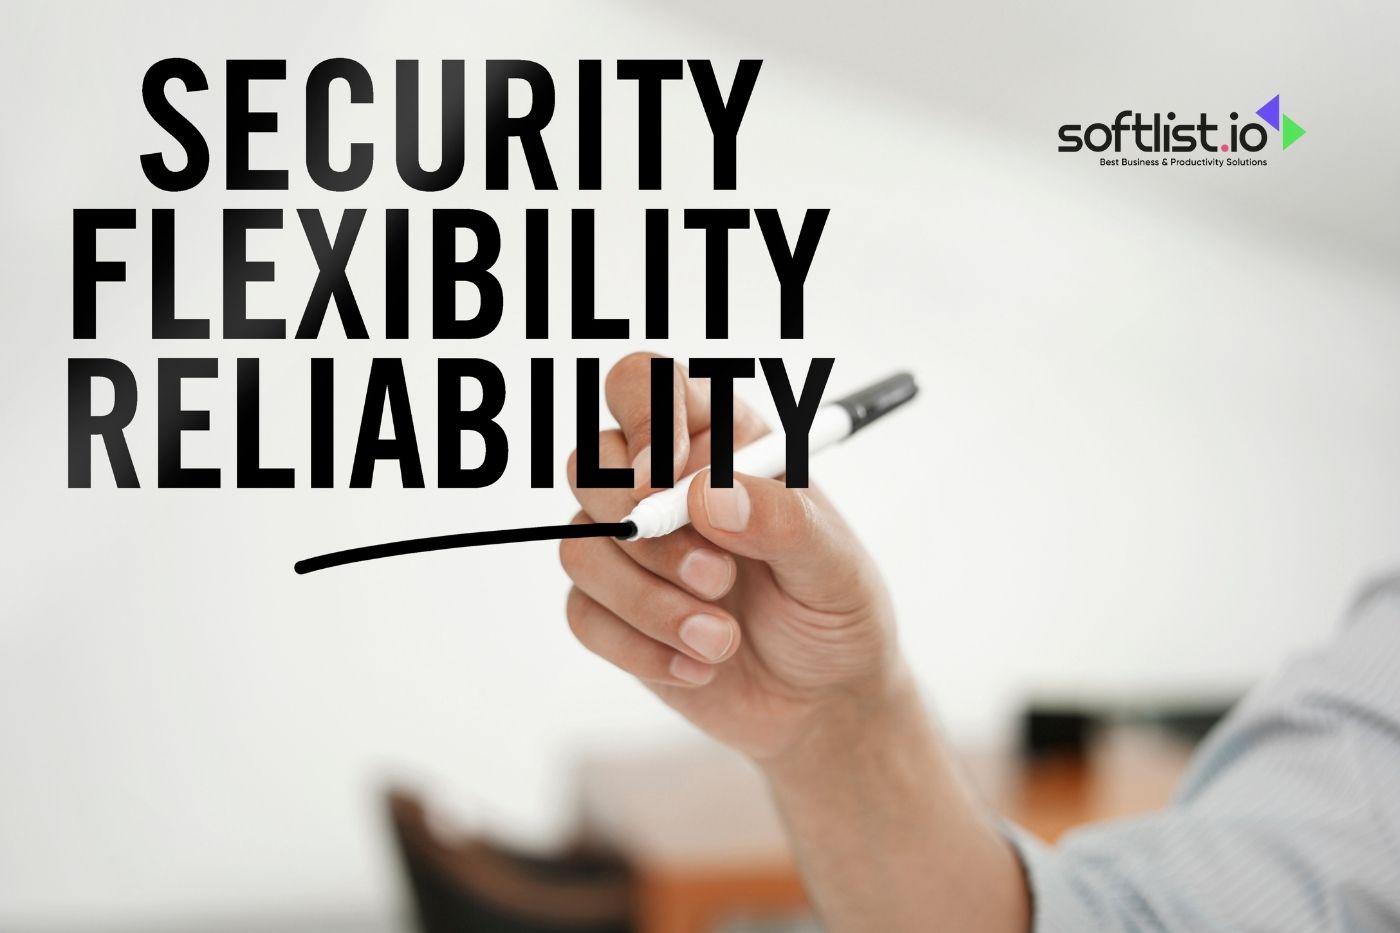 Key business concepts of security, flexibility, and reliability written on board.